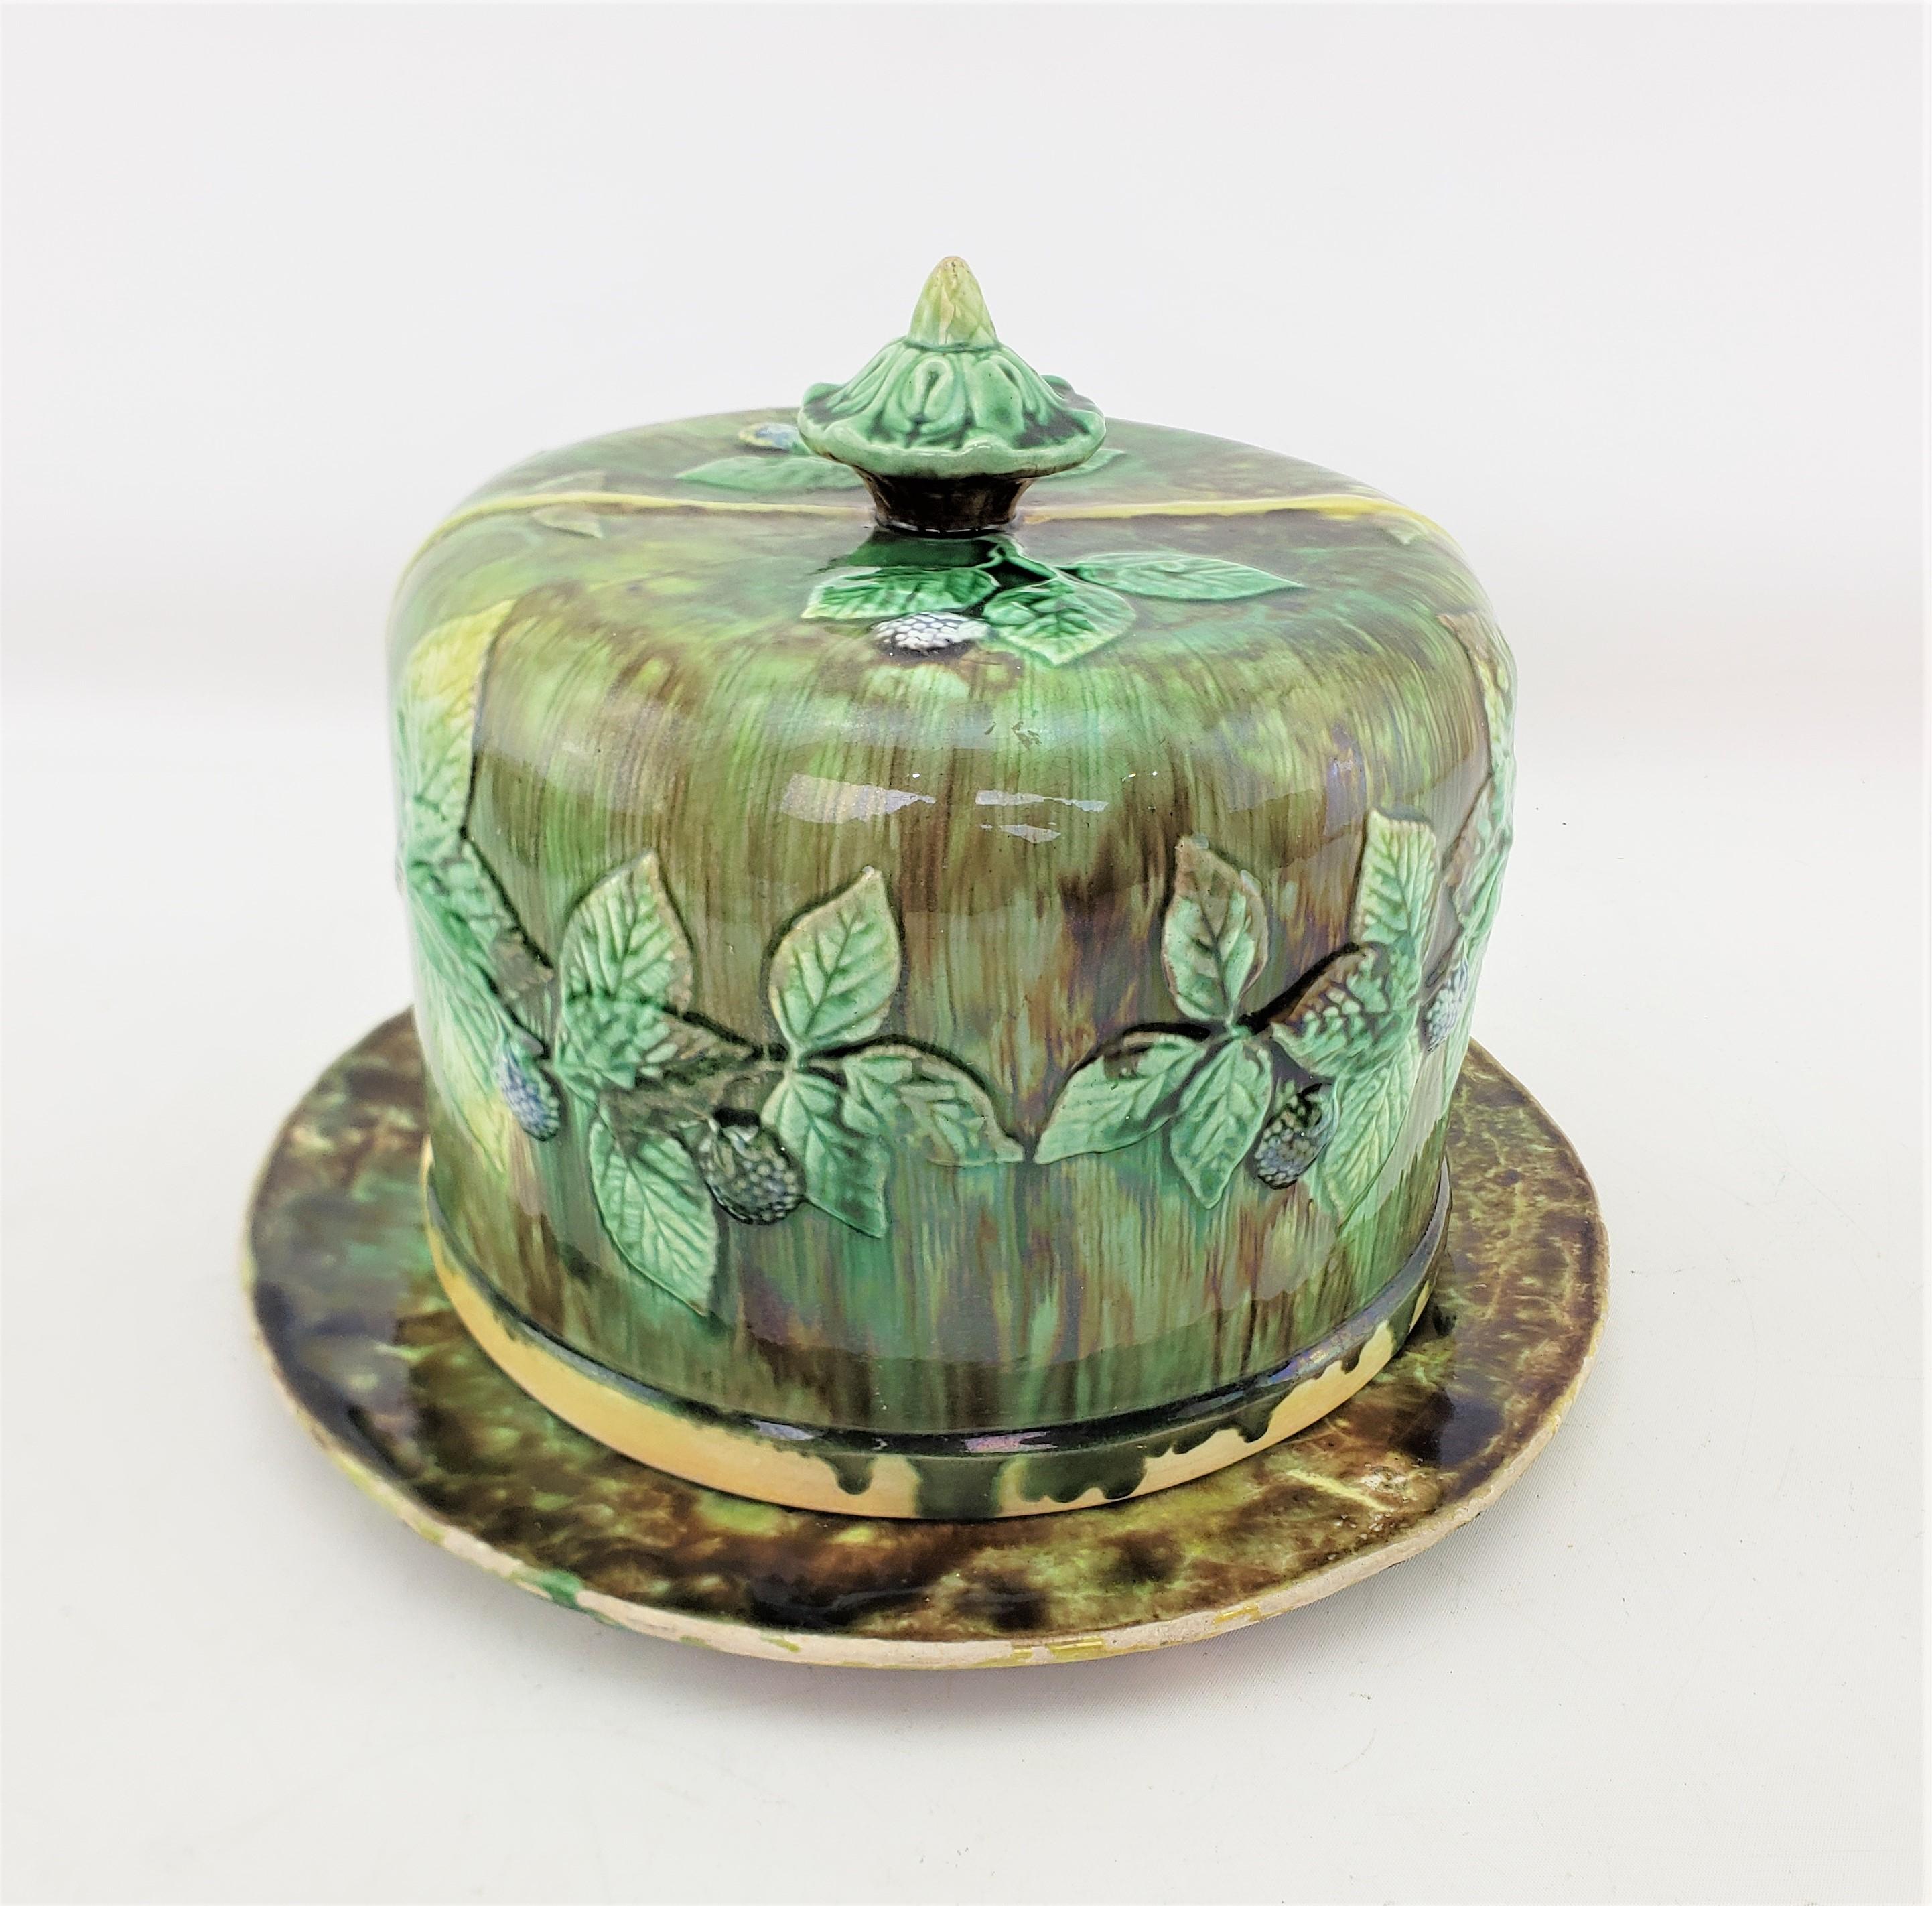 This antique cheese server or dome is unsigned, but presumed to have originated from the United States and dates to approximately 1880 and done in the period Victorian style. This large cheese dome is composed of majolica with a deep green and brown